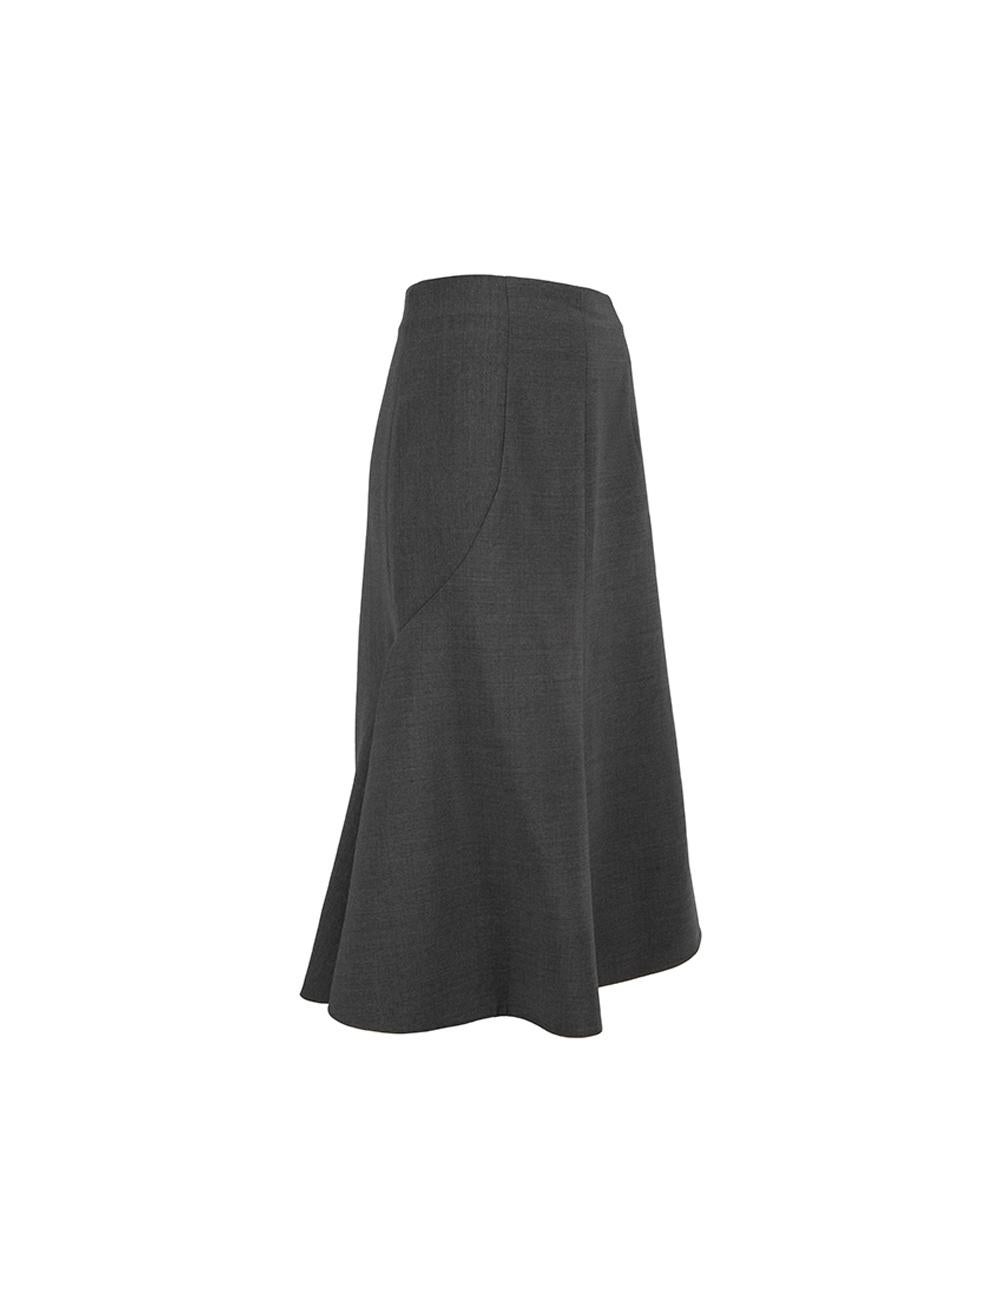 CONDITION is Very good. Hardly any visible wear to skirt is evident. The inner waistband is unstiched in some areas on this used Stella McCartney designer resale item. Details Grey Wool Midi flared skirt High waisted Side zip closure with hook and